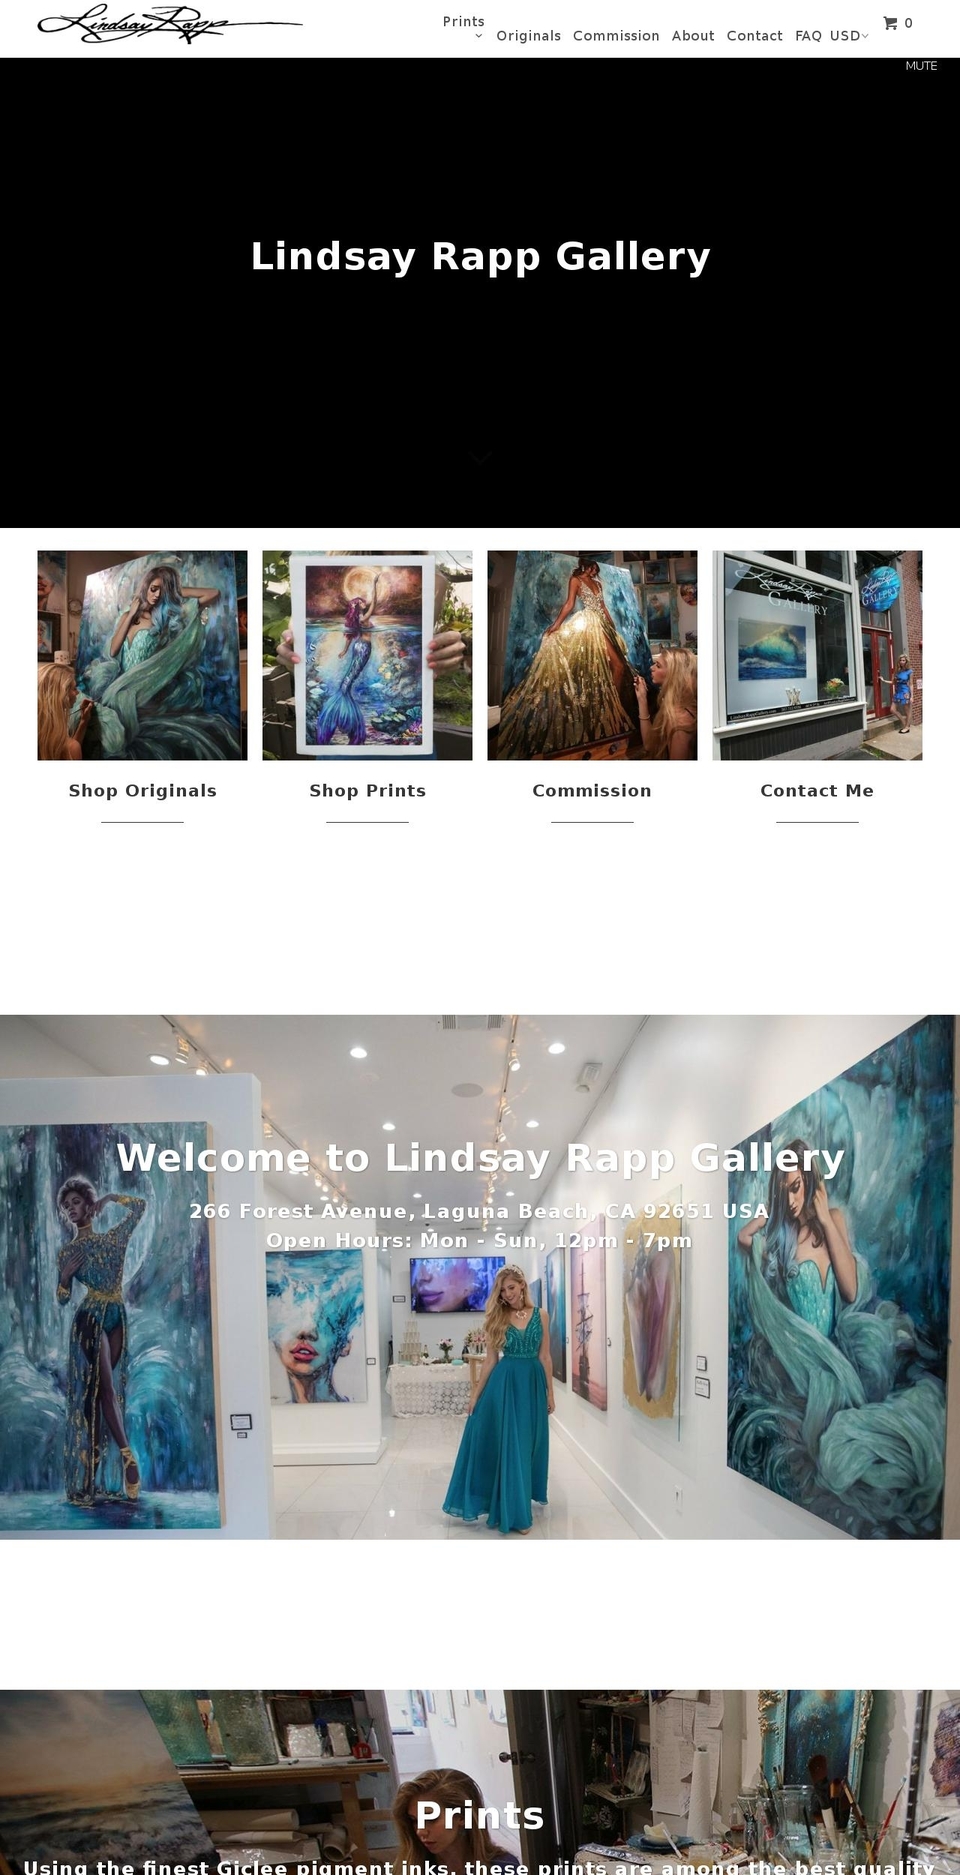 [DEV] Parallax - Fixed Text Issue - IS Shopify theme site example lindsayrapp.com